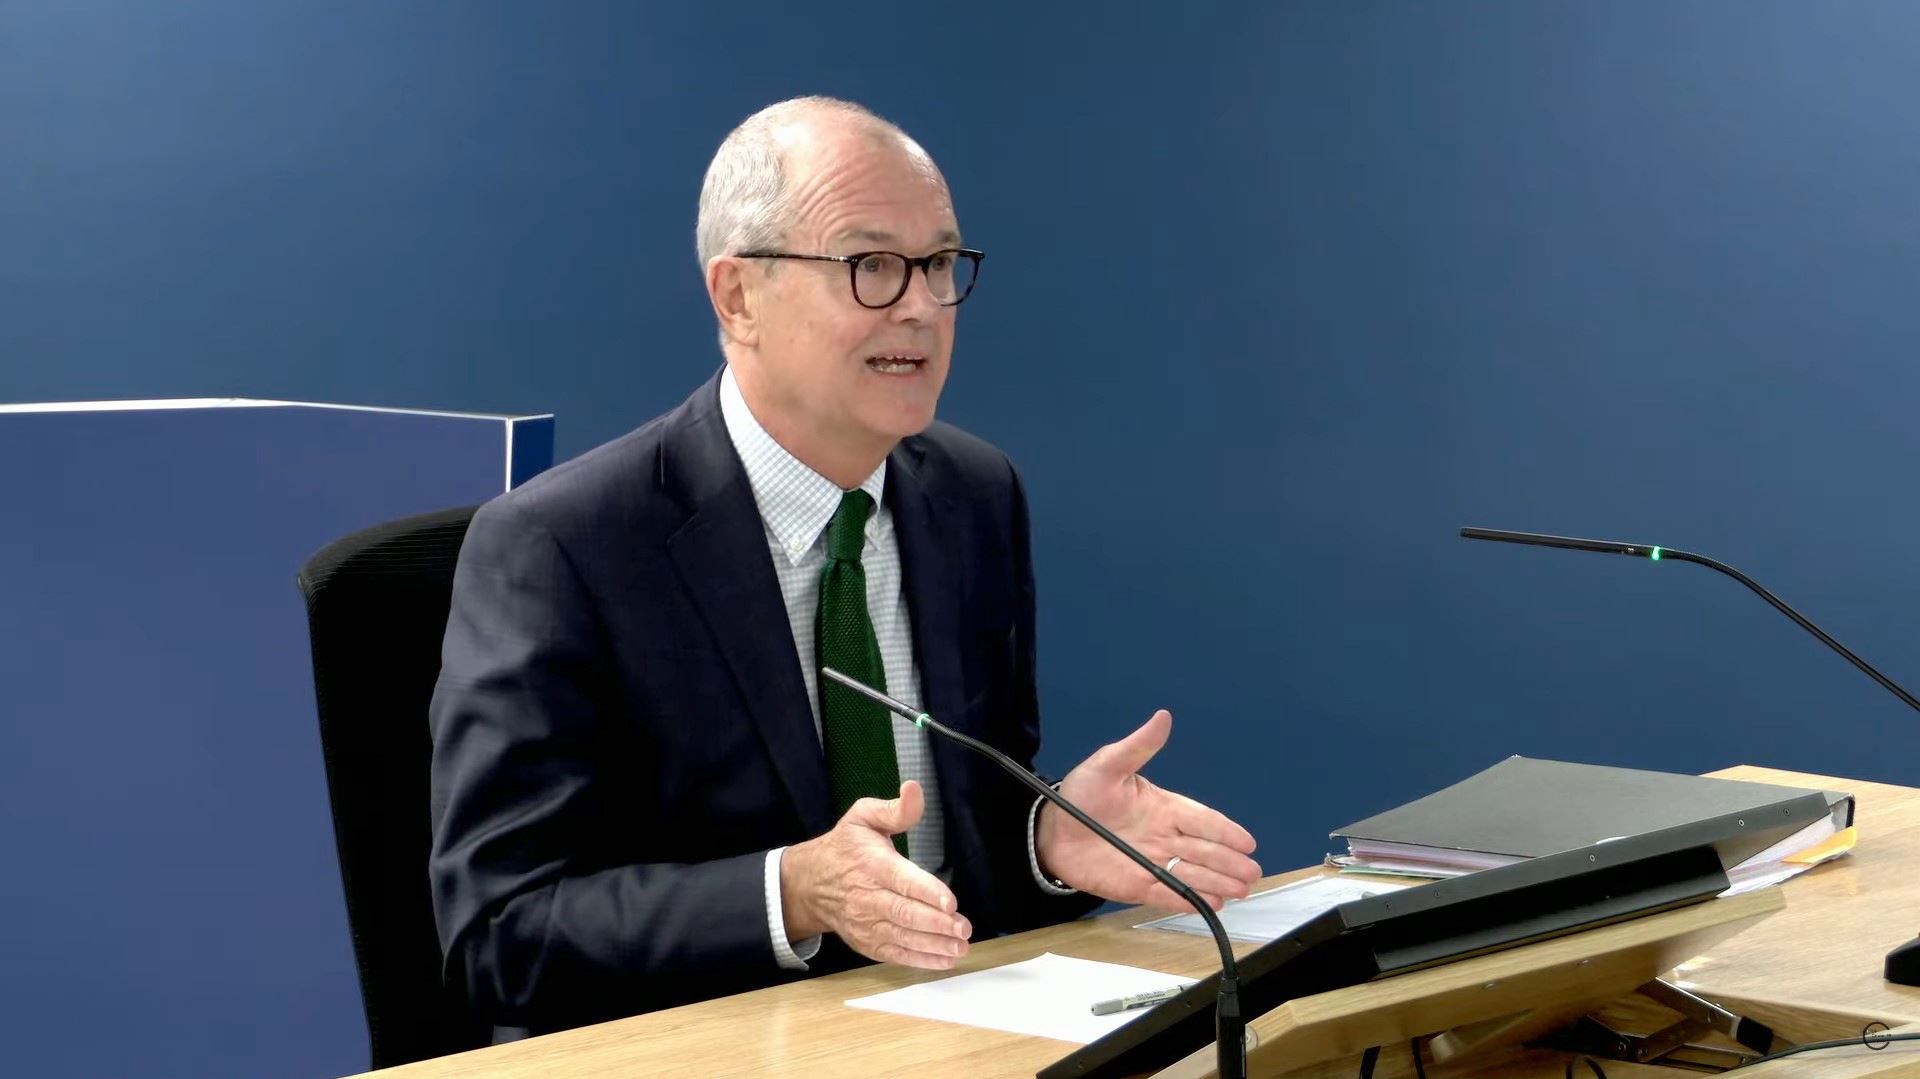 Sir Patrick Vallance was giving evidence to the Covid-19 inquiry (UK Covid-19 Inquiry/PA)